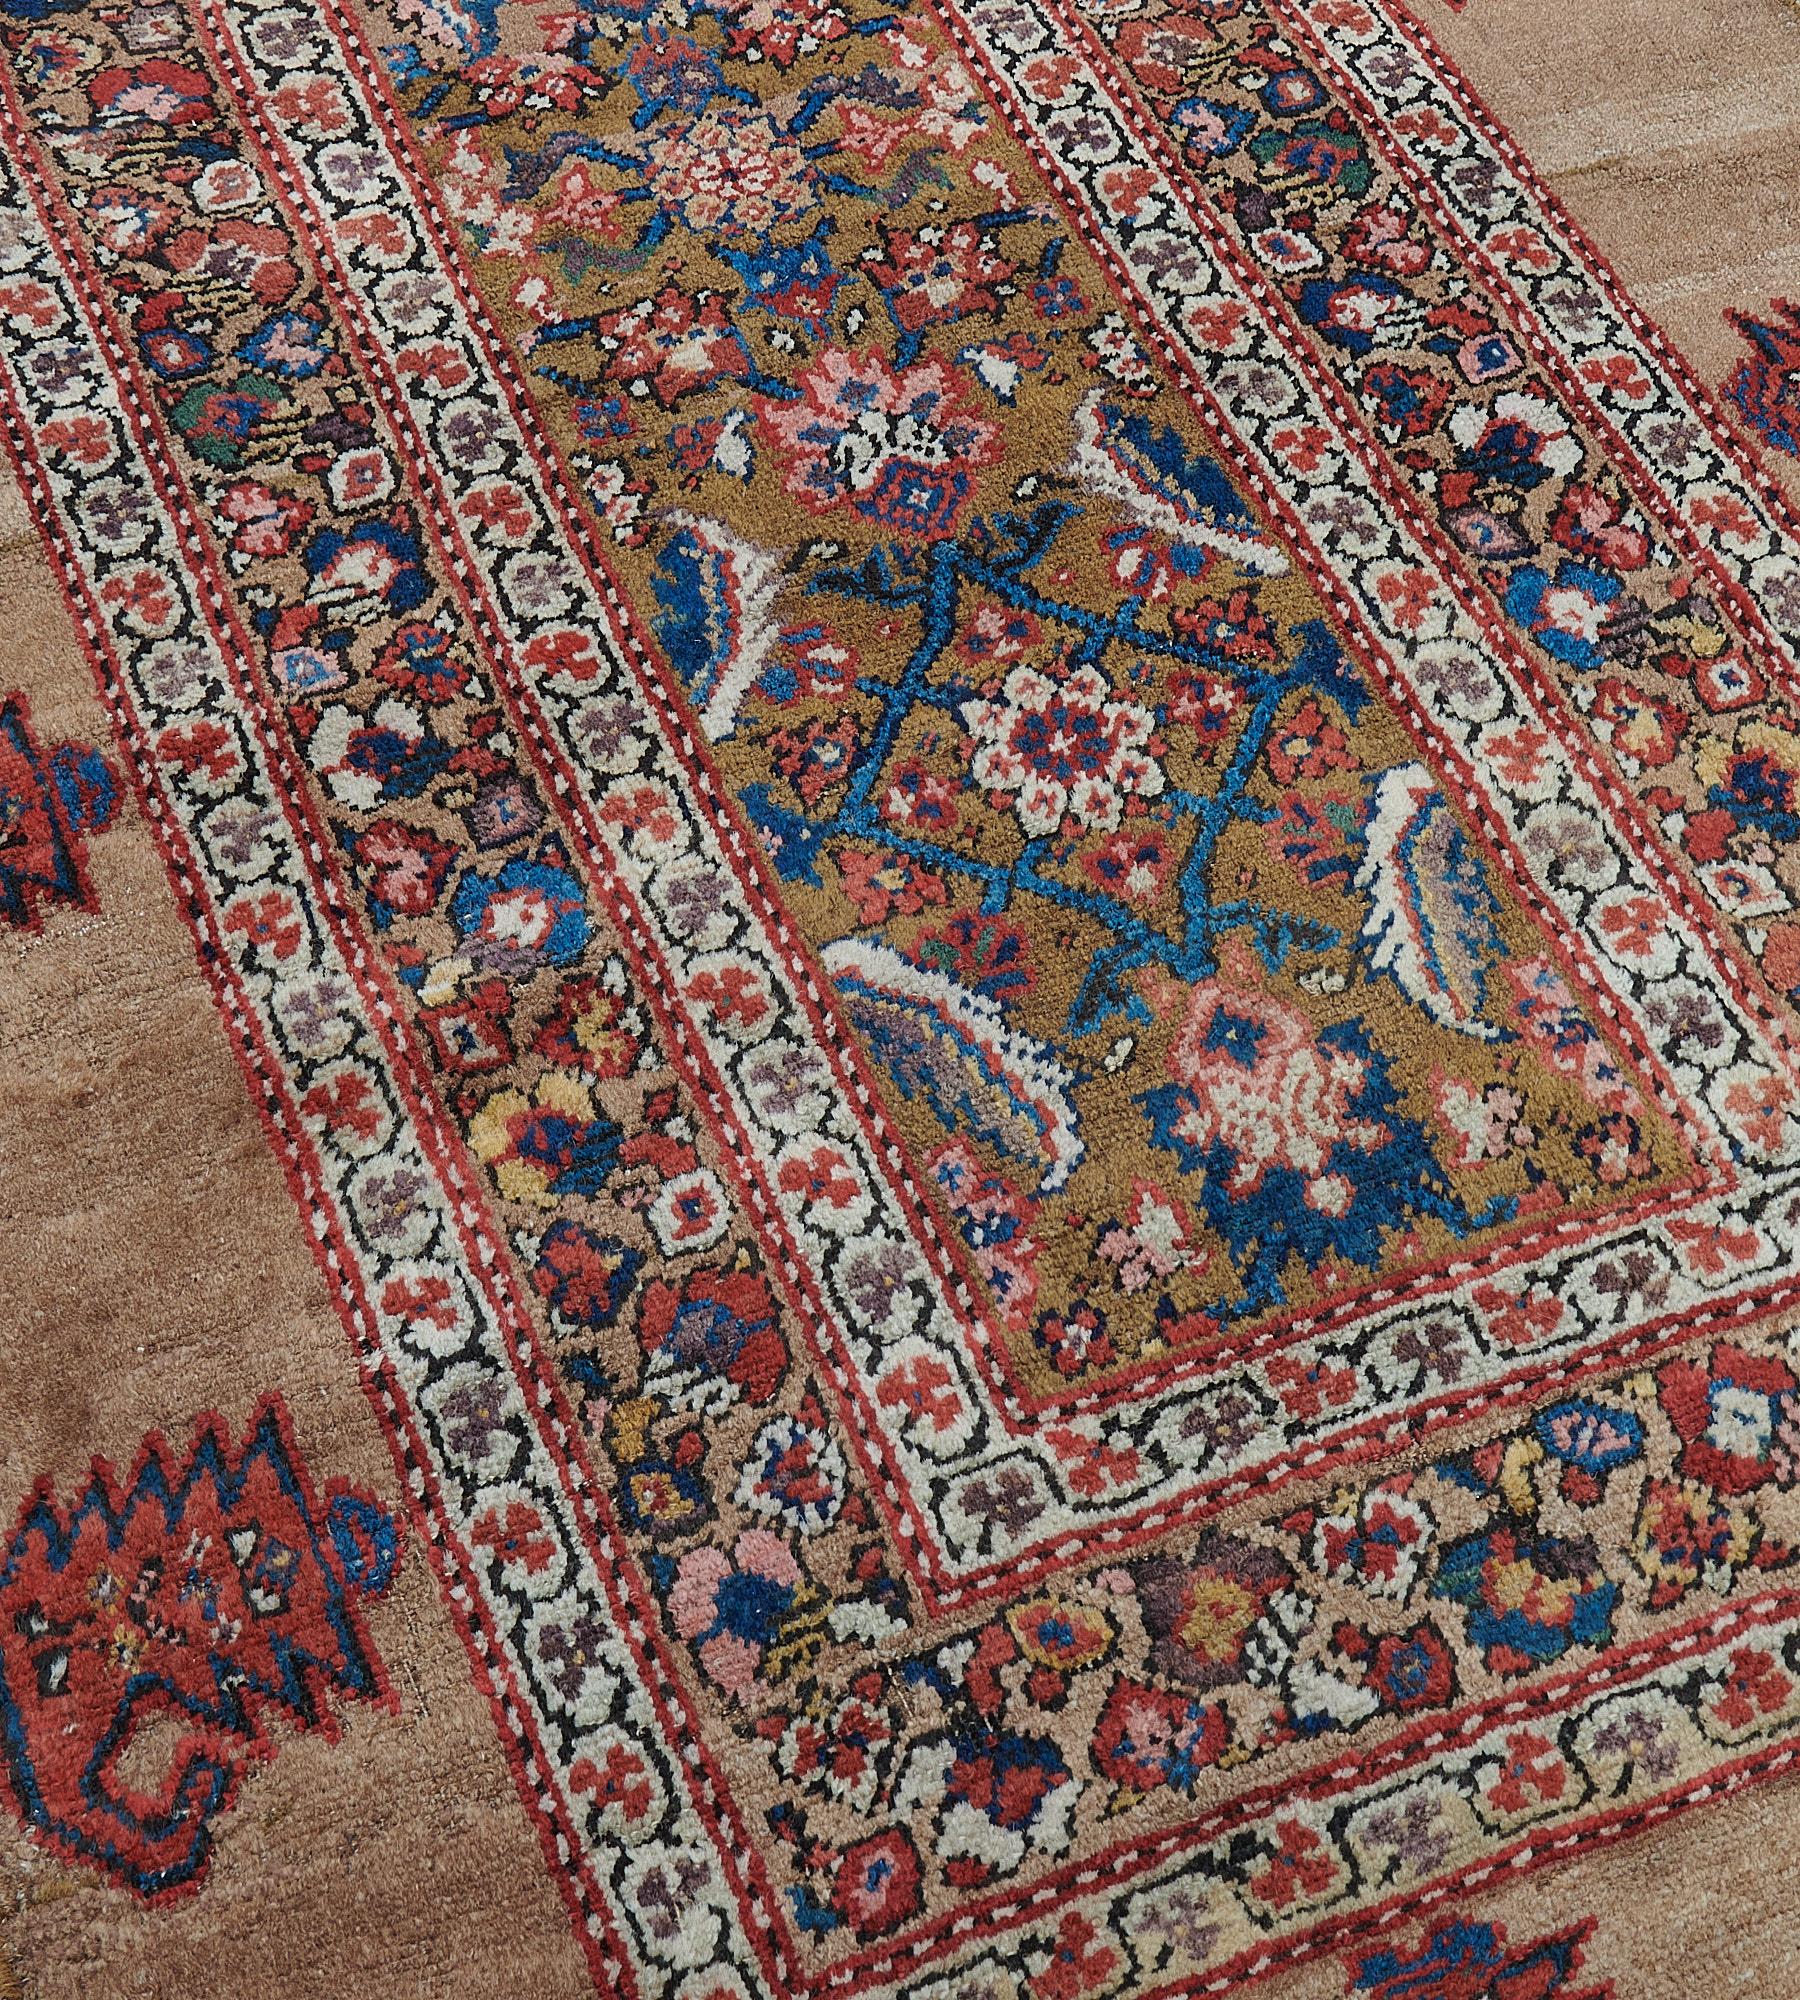 This antique, circa 1900, Serab runner has a caramel-brown narrow field with an overall design of polychrome bold herati-pattern with bold serrated leaves at each side, in a buff-brown border of brick-red, sandy-yellow, dusty-pink, ivory and